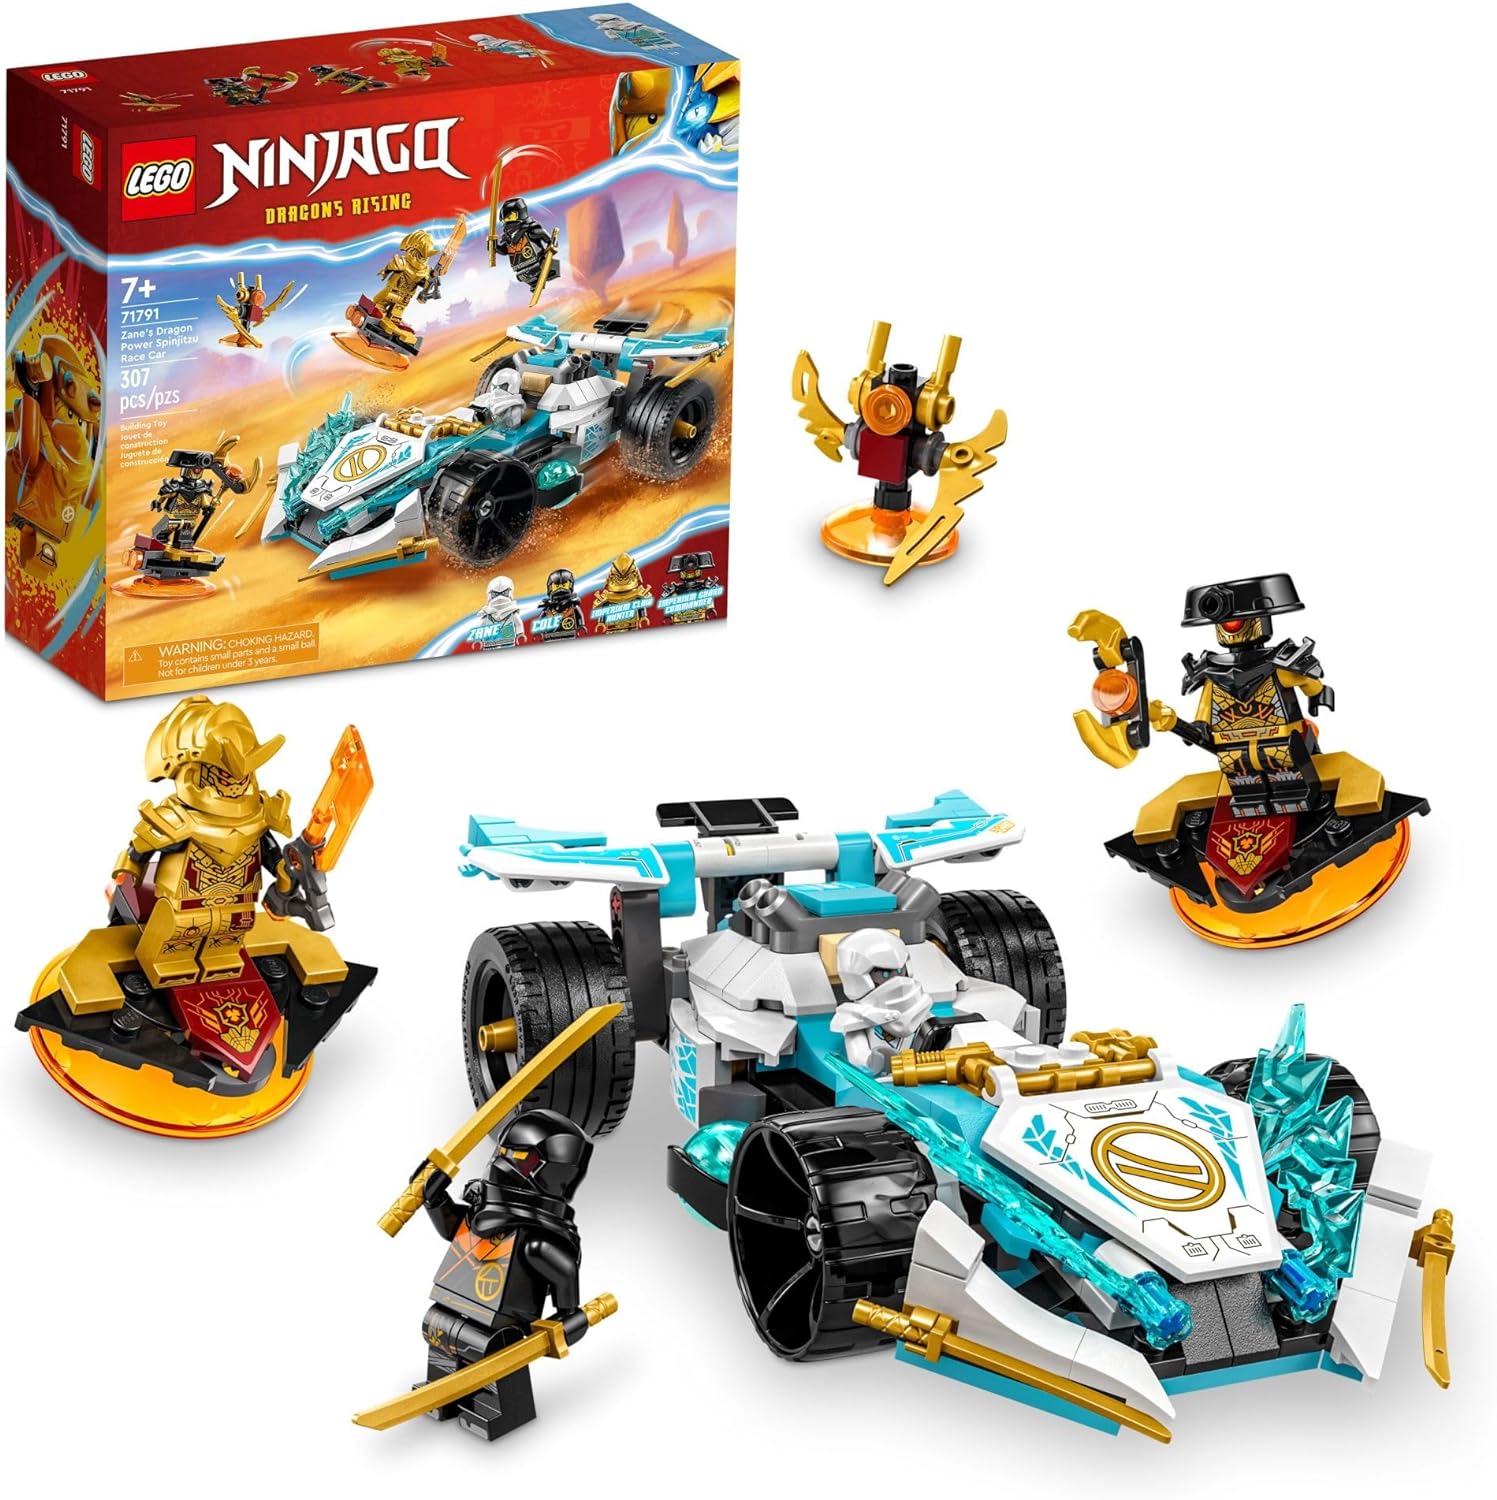 LEGO NINJAGO Zanes Dragon Power Spinjitzu Race Car 71791 Building Toy Set, Features a Ninja Car, 2 Hover Flyers, Dragon Toy, and 4 Minifigures, Gift for Kids Aged 7 